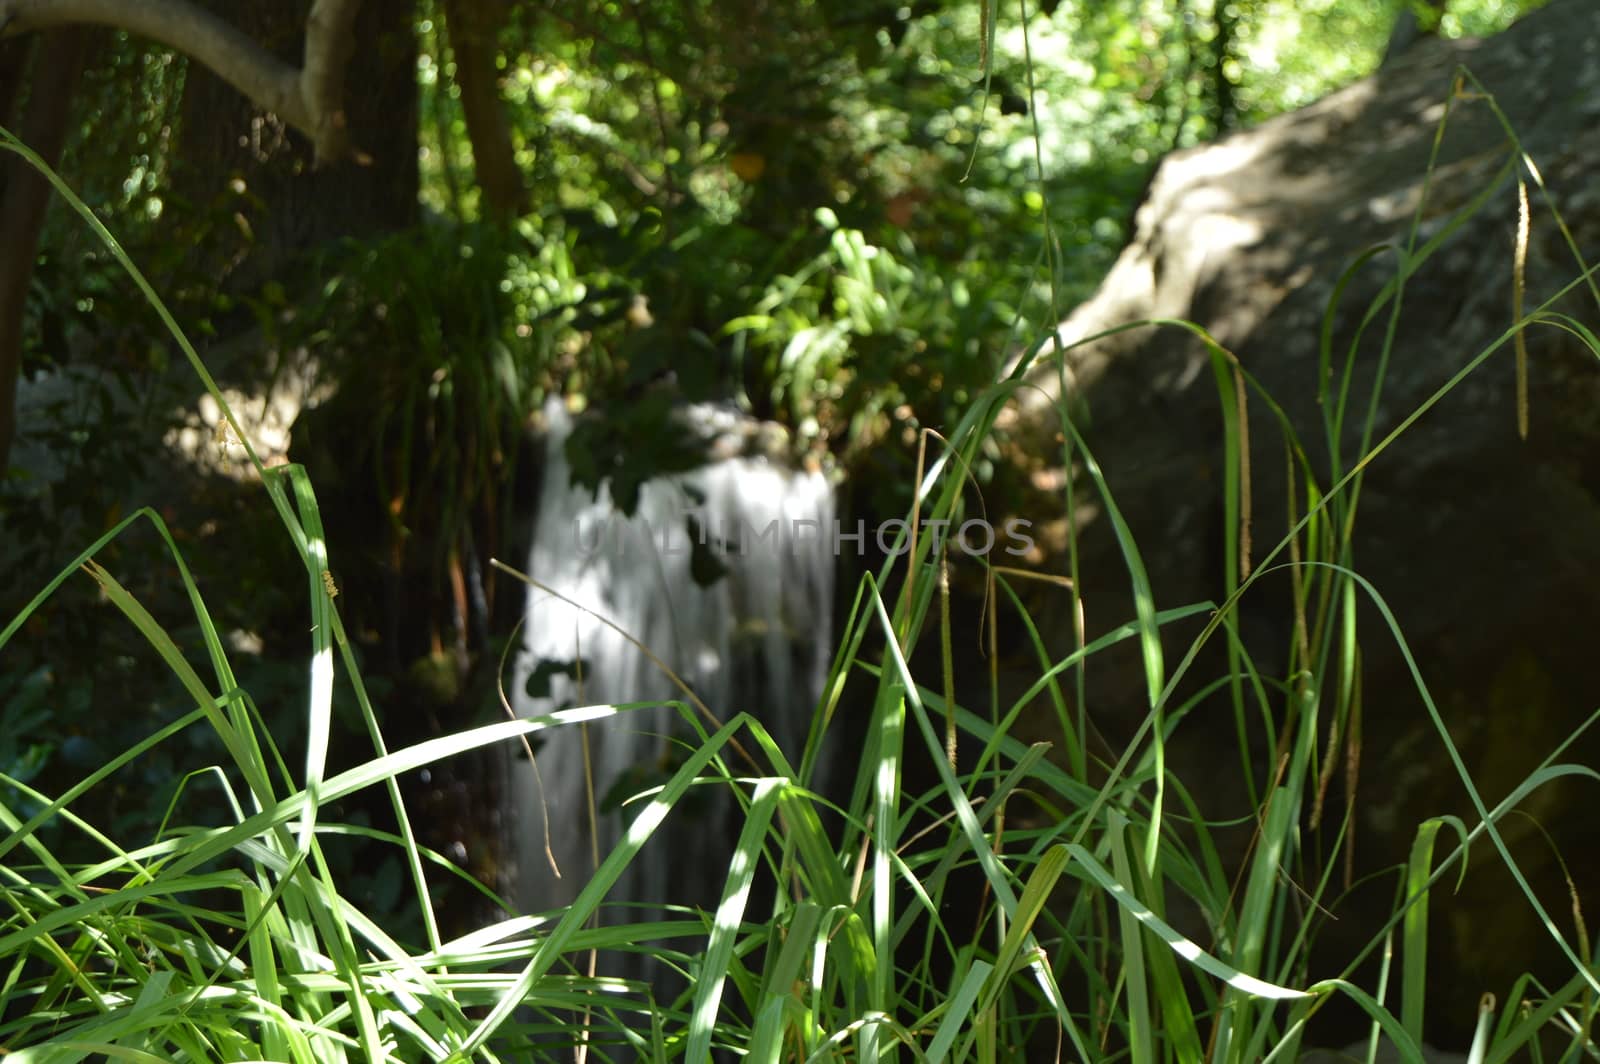 The beautiful blurred background of the waterfall is visible through the green grass in the foreground. Sunlight breaks through the shade of trees by claire_lucia